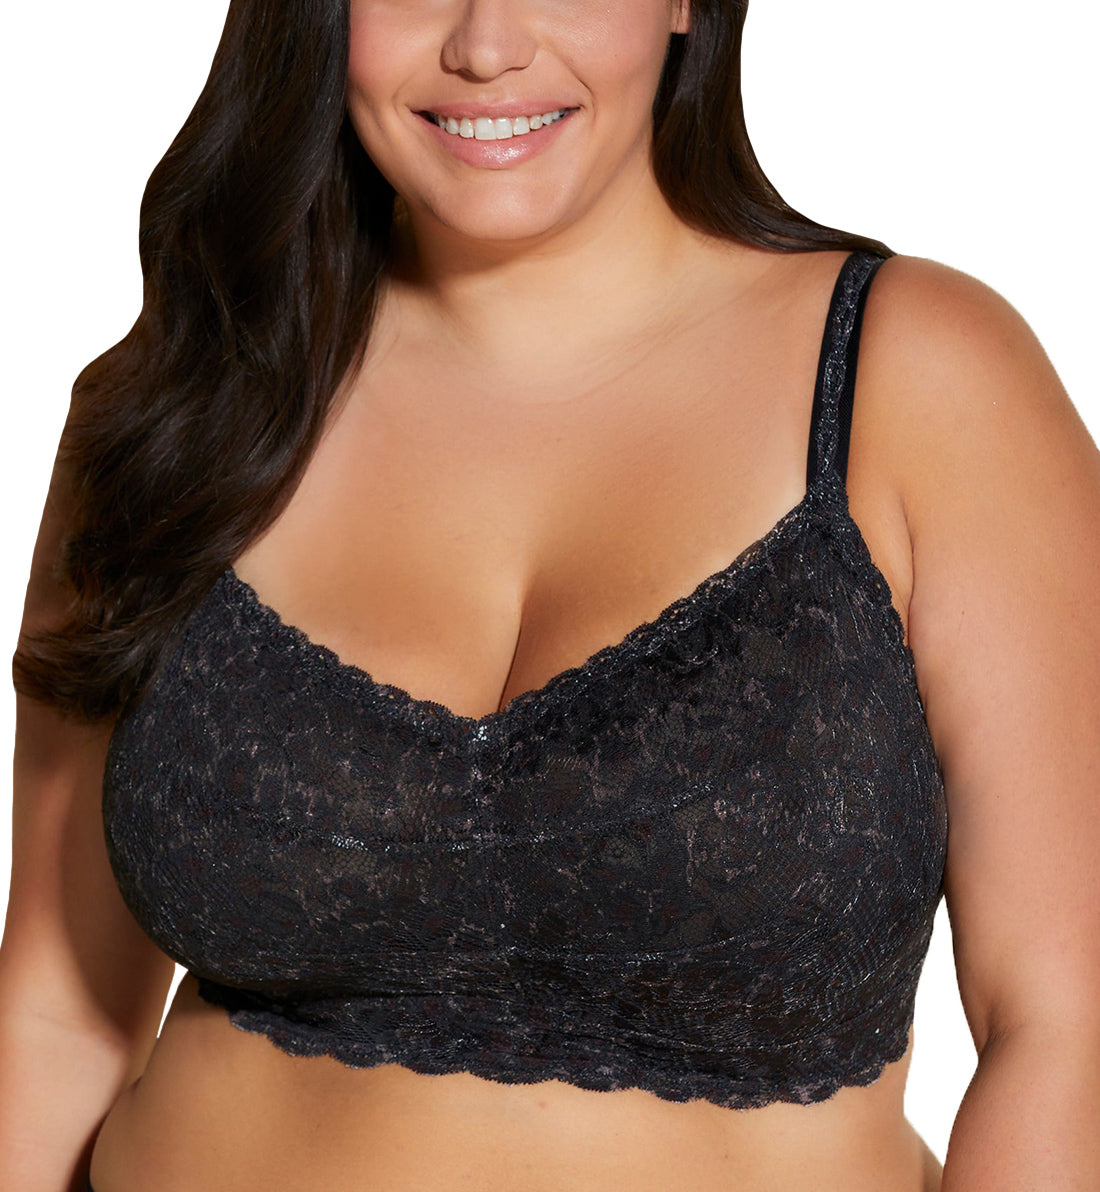 Cosabella Never Say Never Printed SUPER CURVY Sweetie Bralette (NEVEP1322),XS,Black Panther - Black Panther,XS